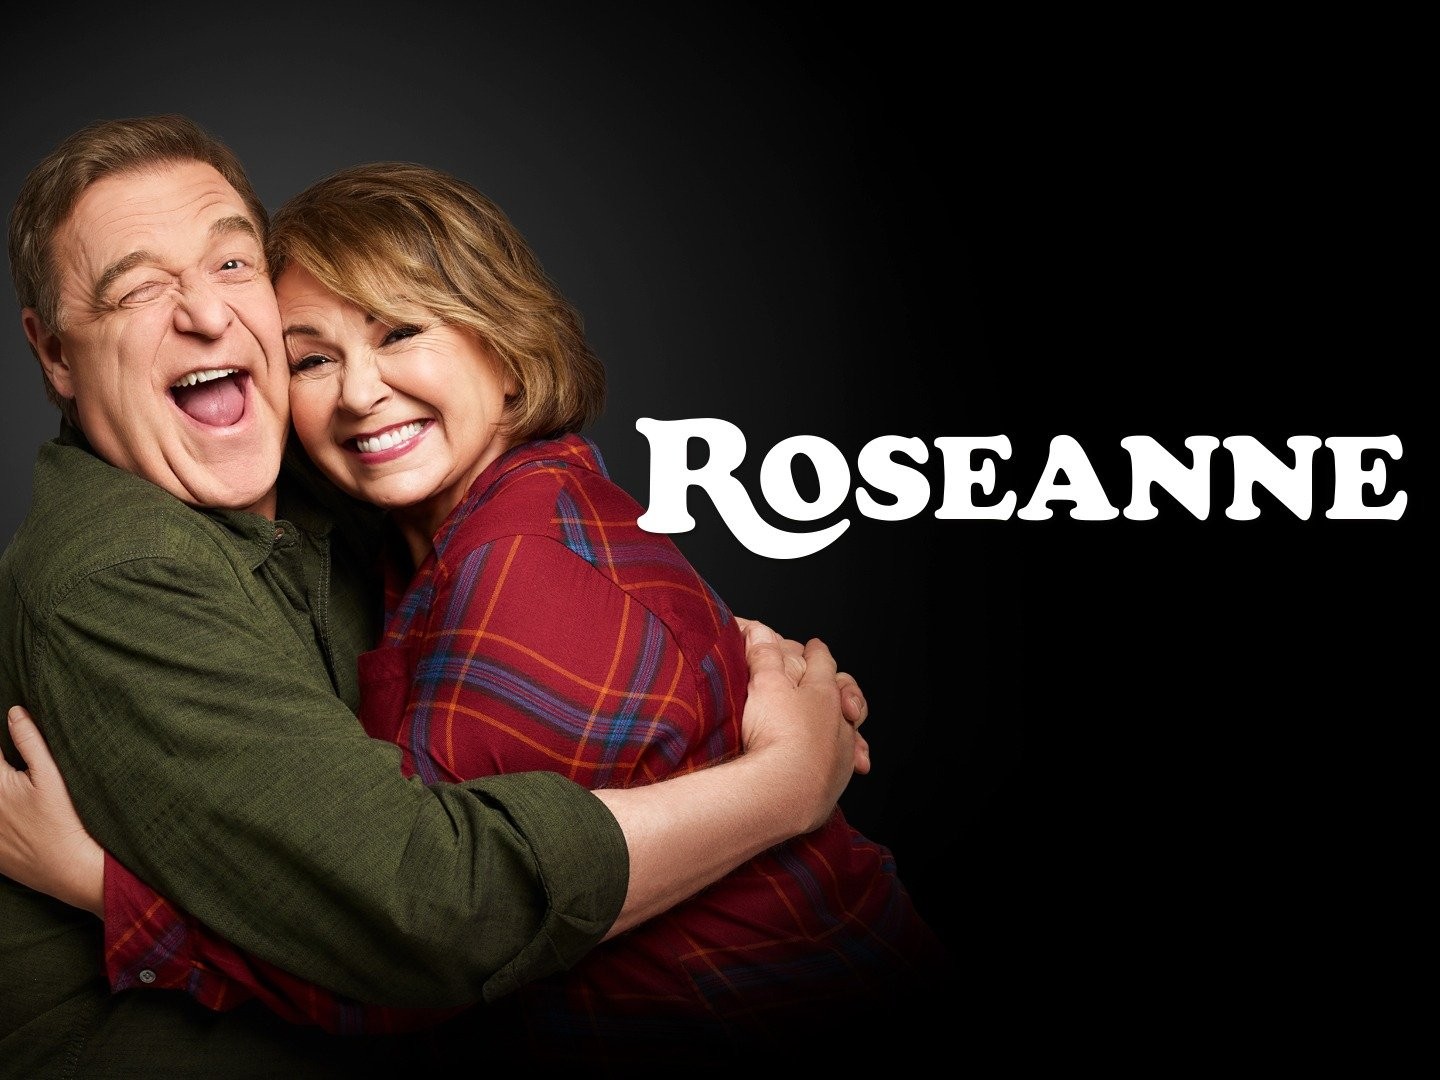 Roseanne' watch parties held across the country - Good Morning America